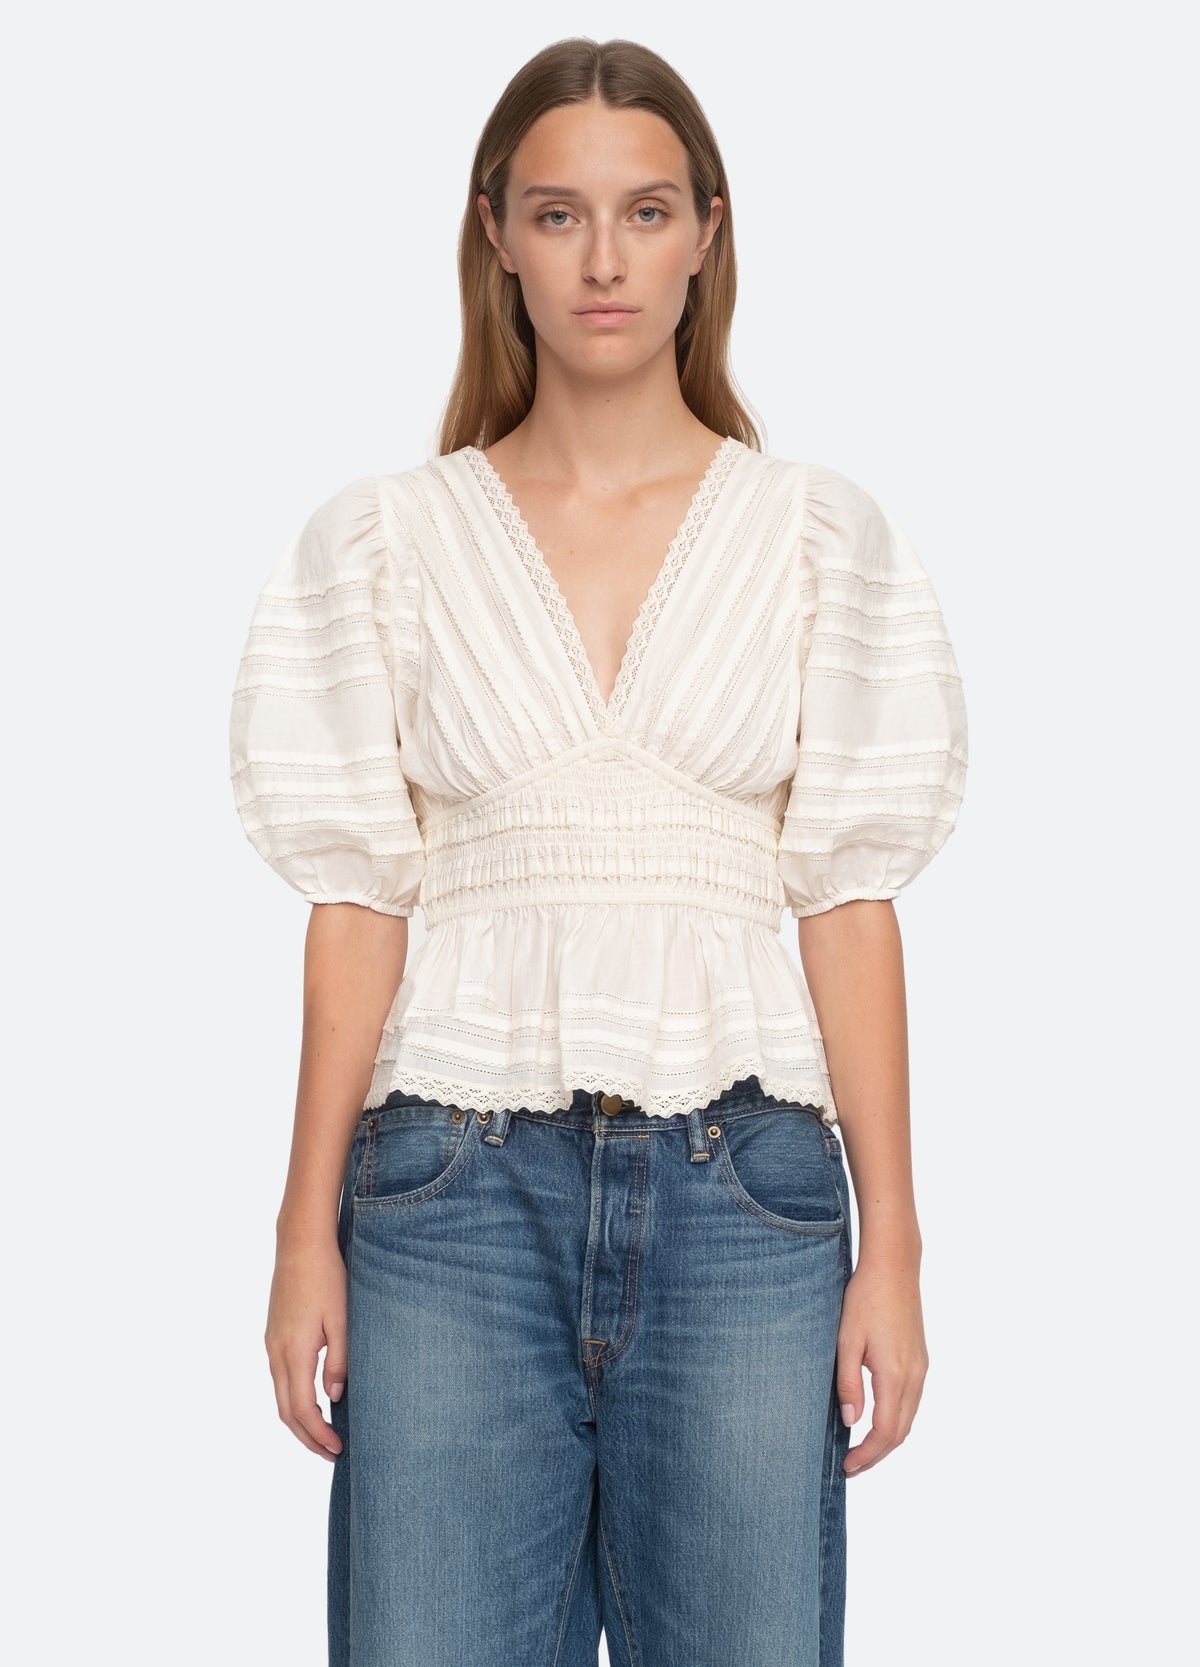 cream-mable top-front view 2 - 3